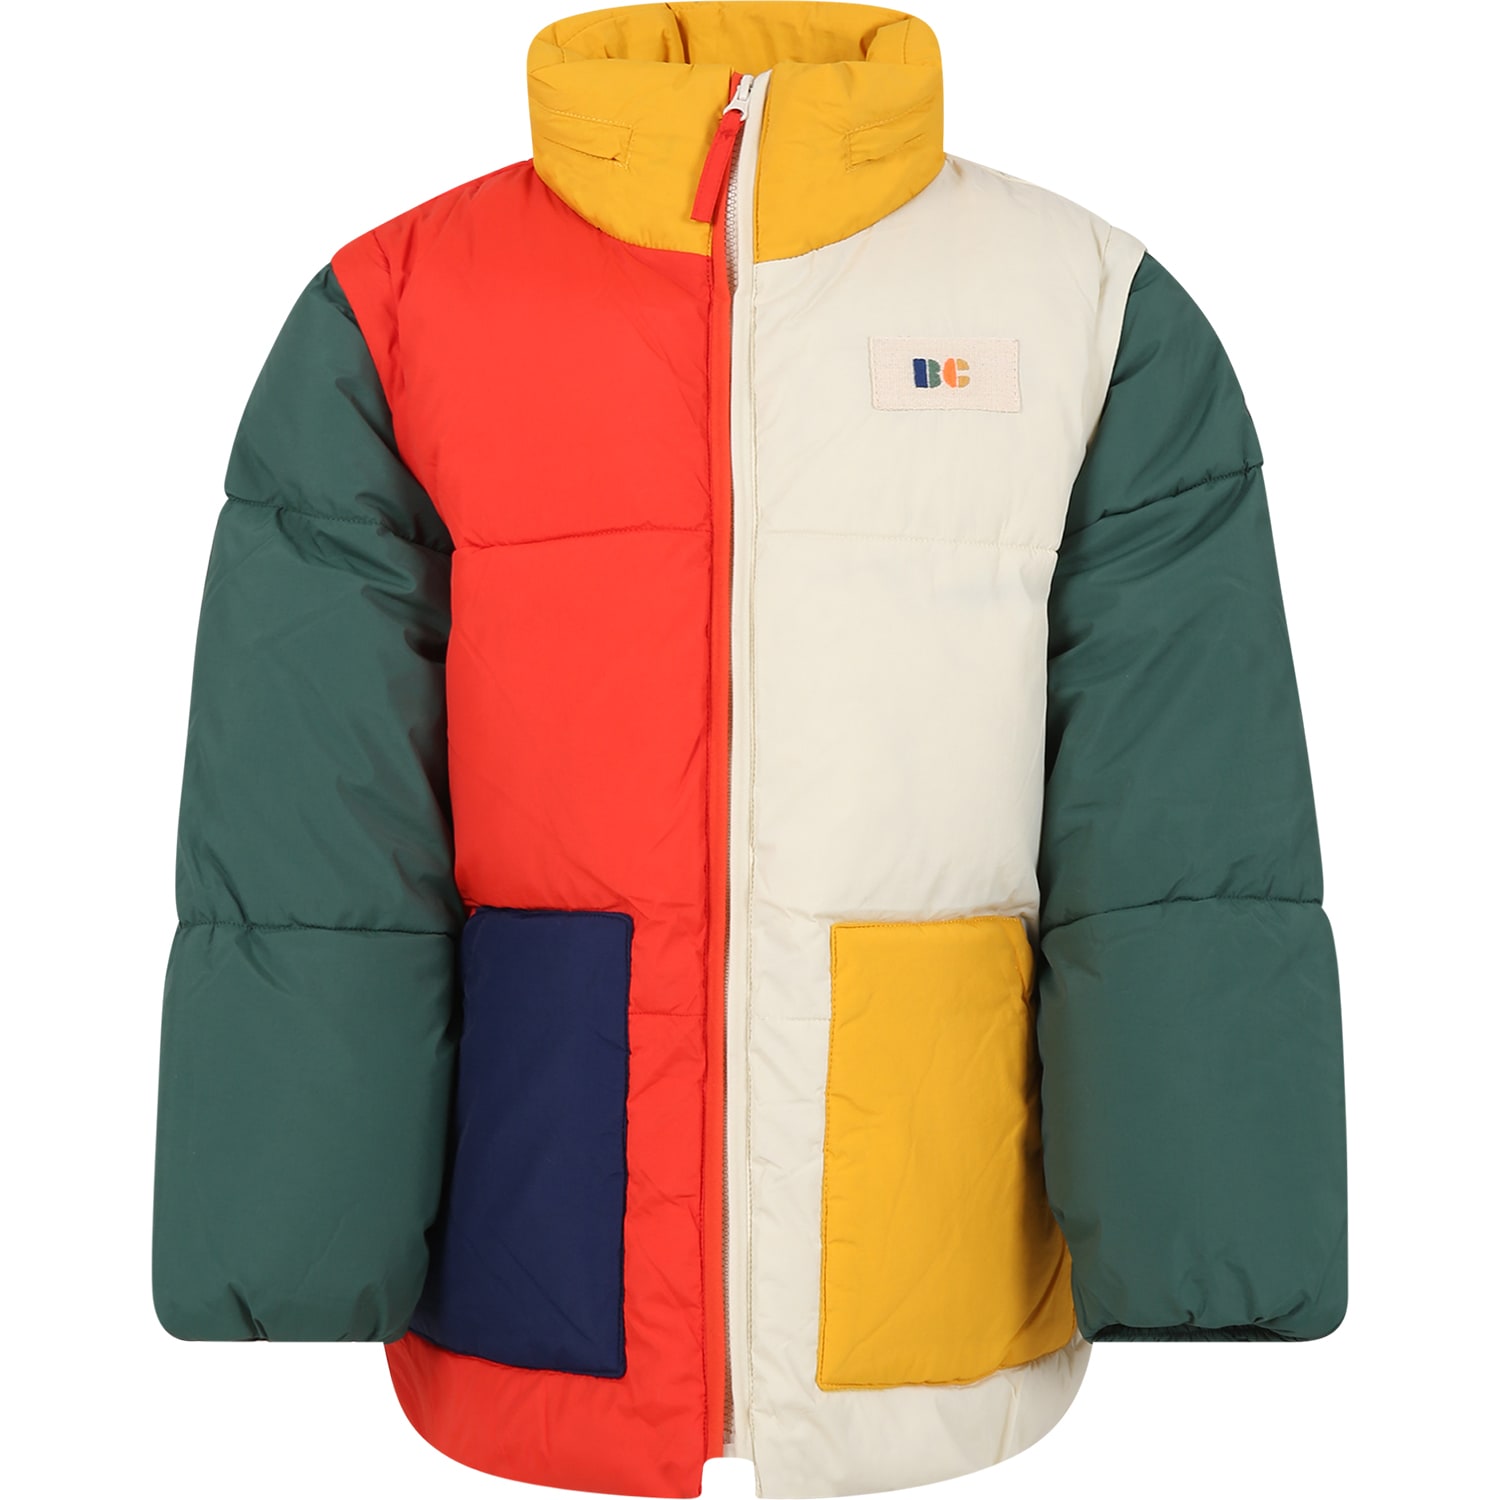 BOBO CHOSES MULTICOLOR DOWN JACKET FOR KIDS WITH LOGO